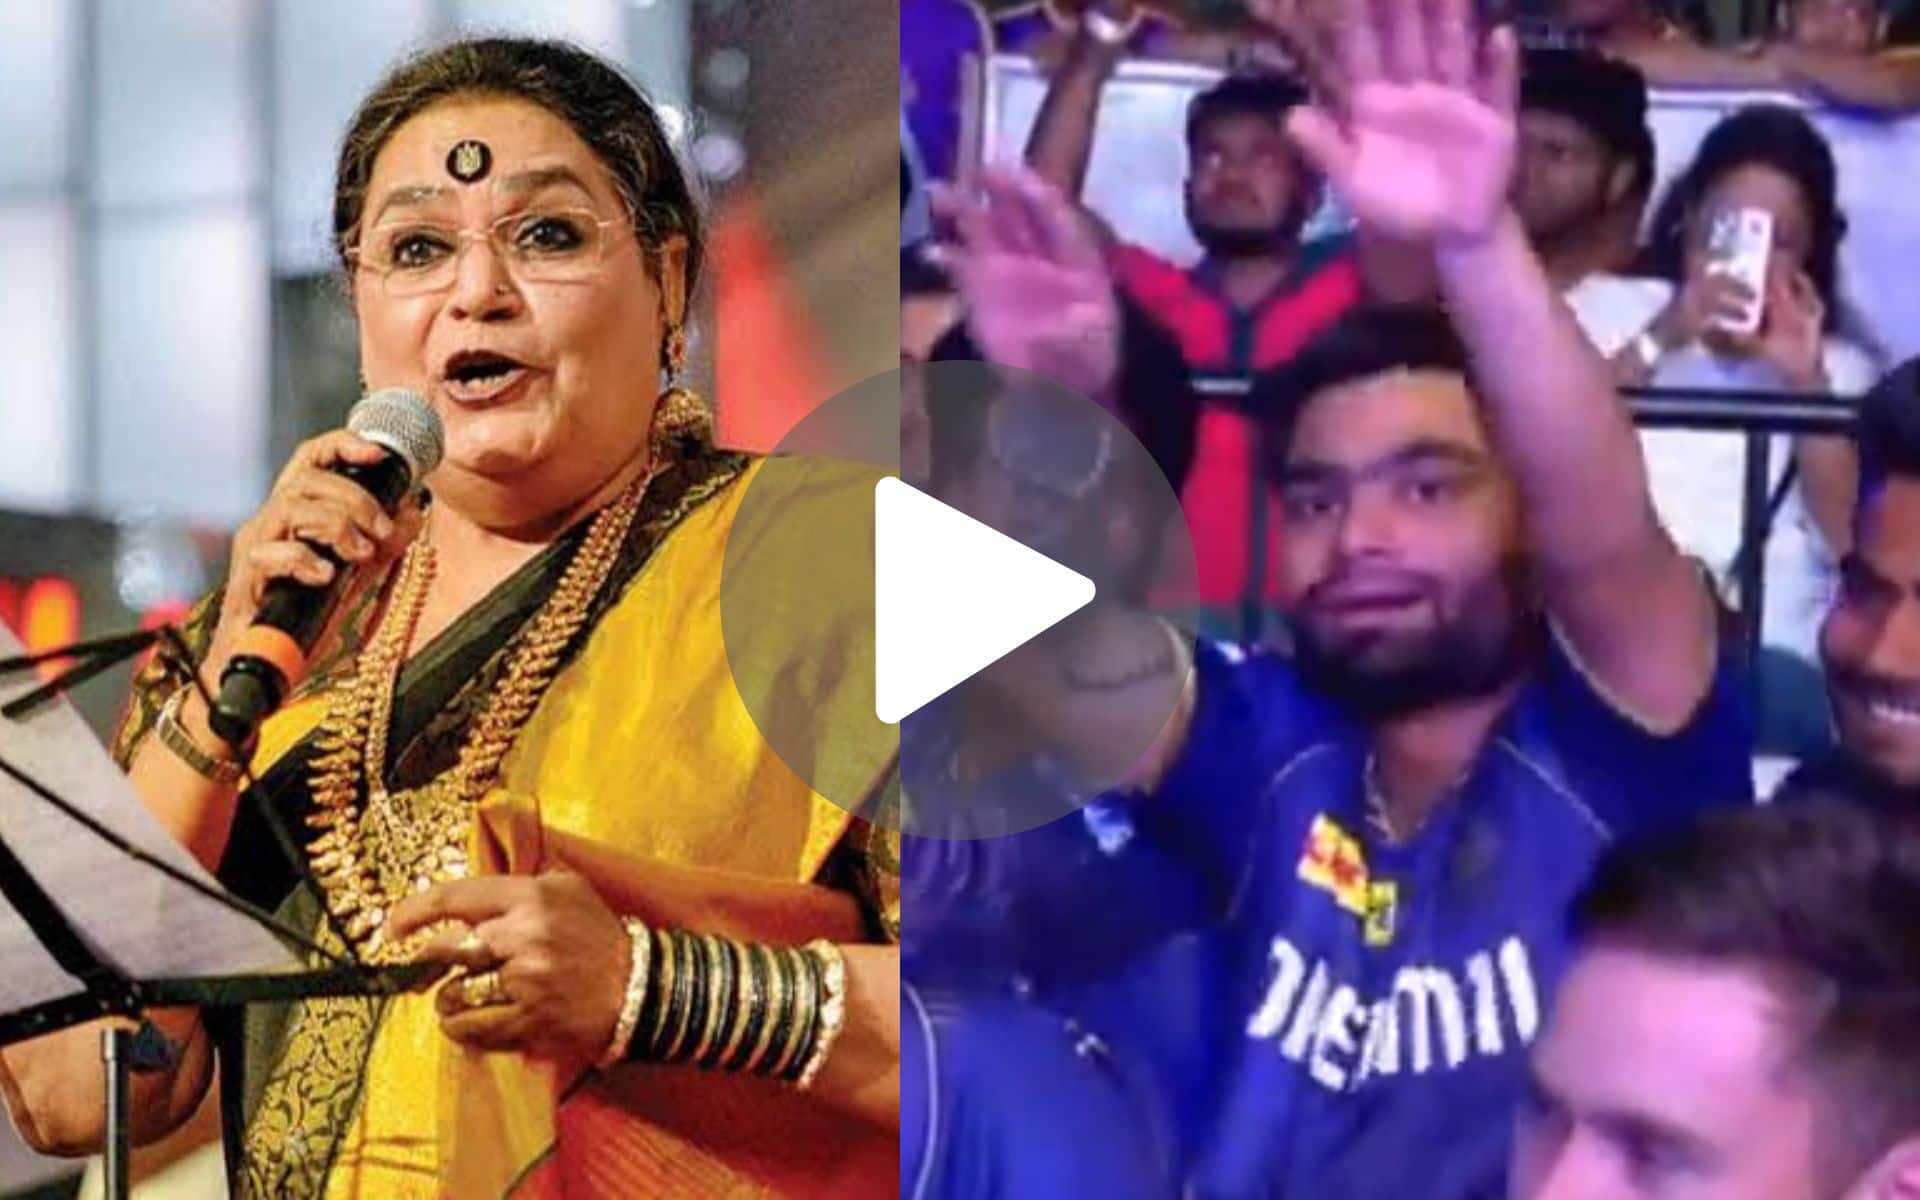 [Watch] Rinku Singh Sets Internet Buzzing With Dance Moves At Usha Uthup's Singing